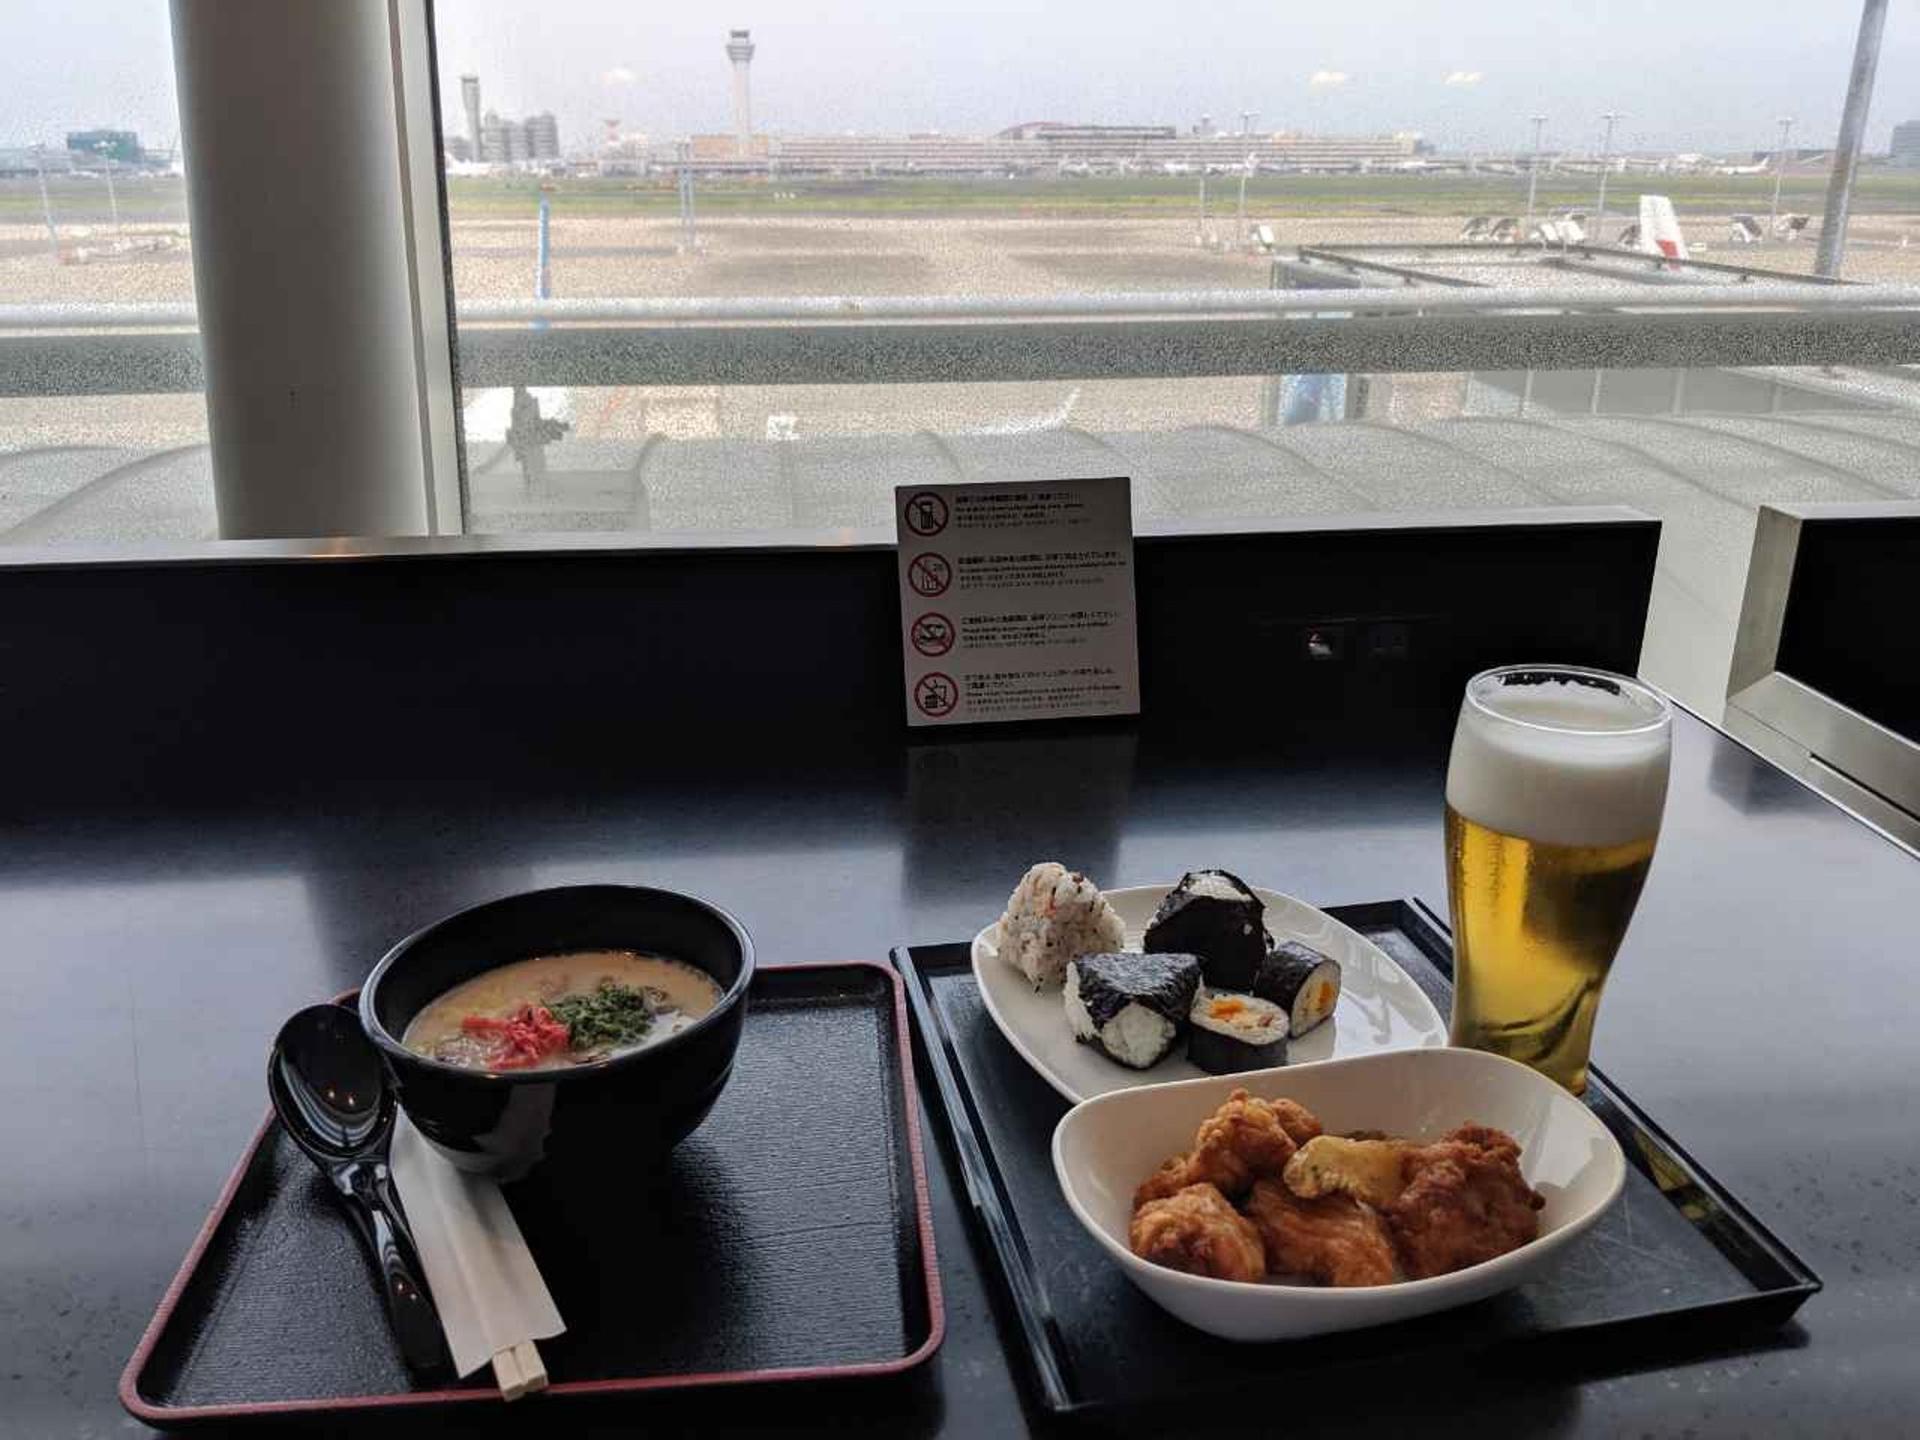 All Nippon Airways ANA Lounge (Gate 110) image 37 of 41